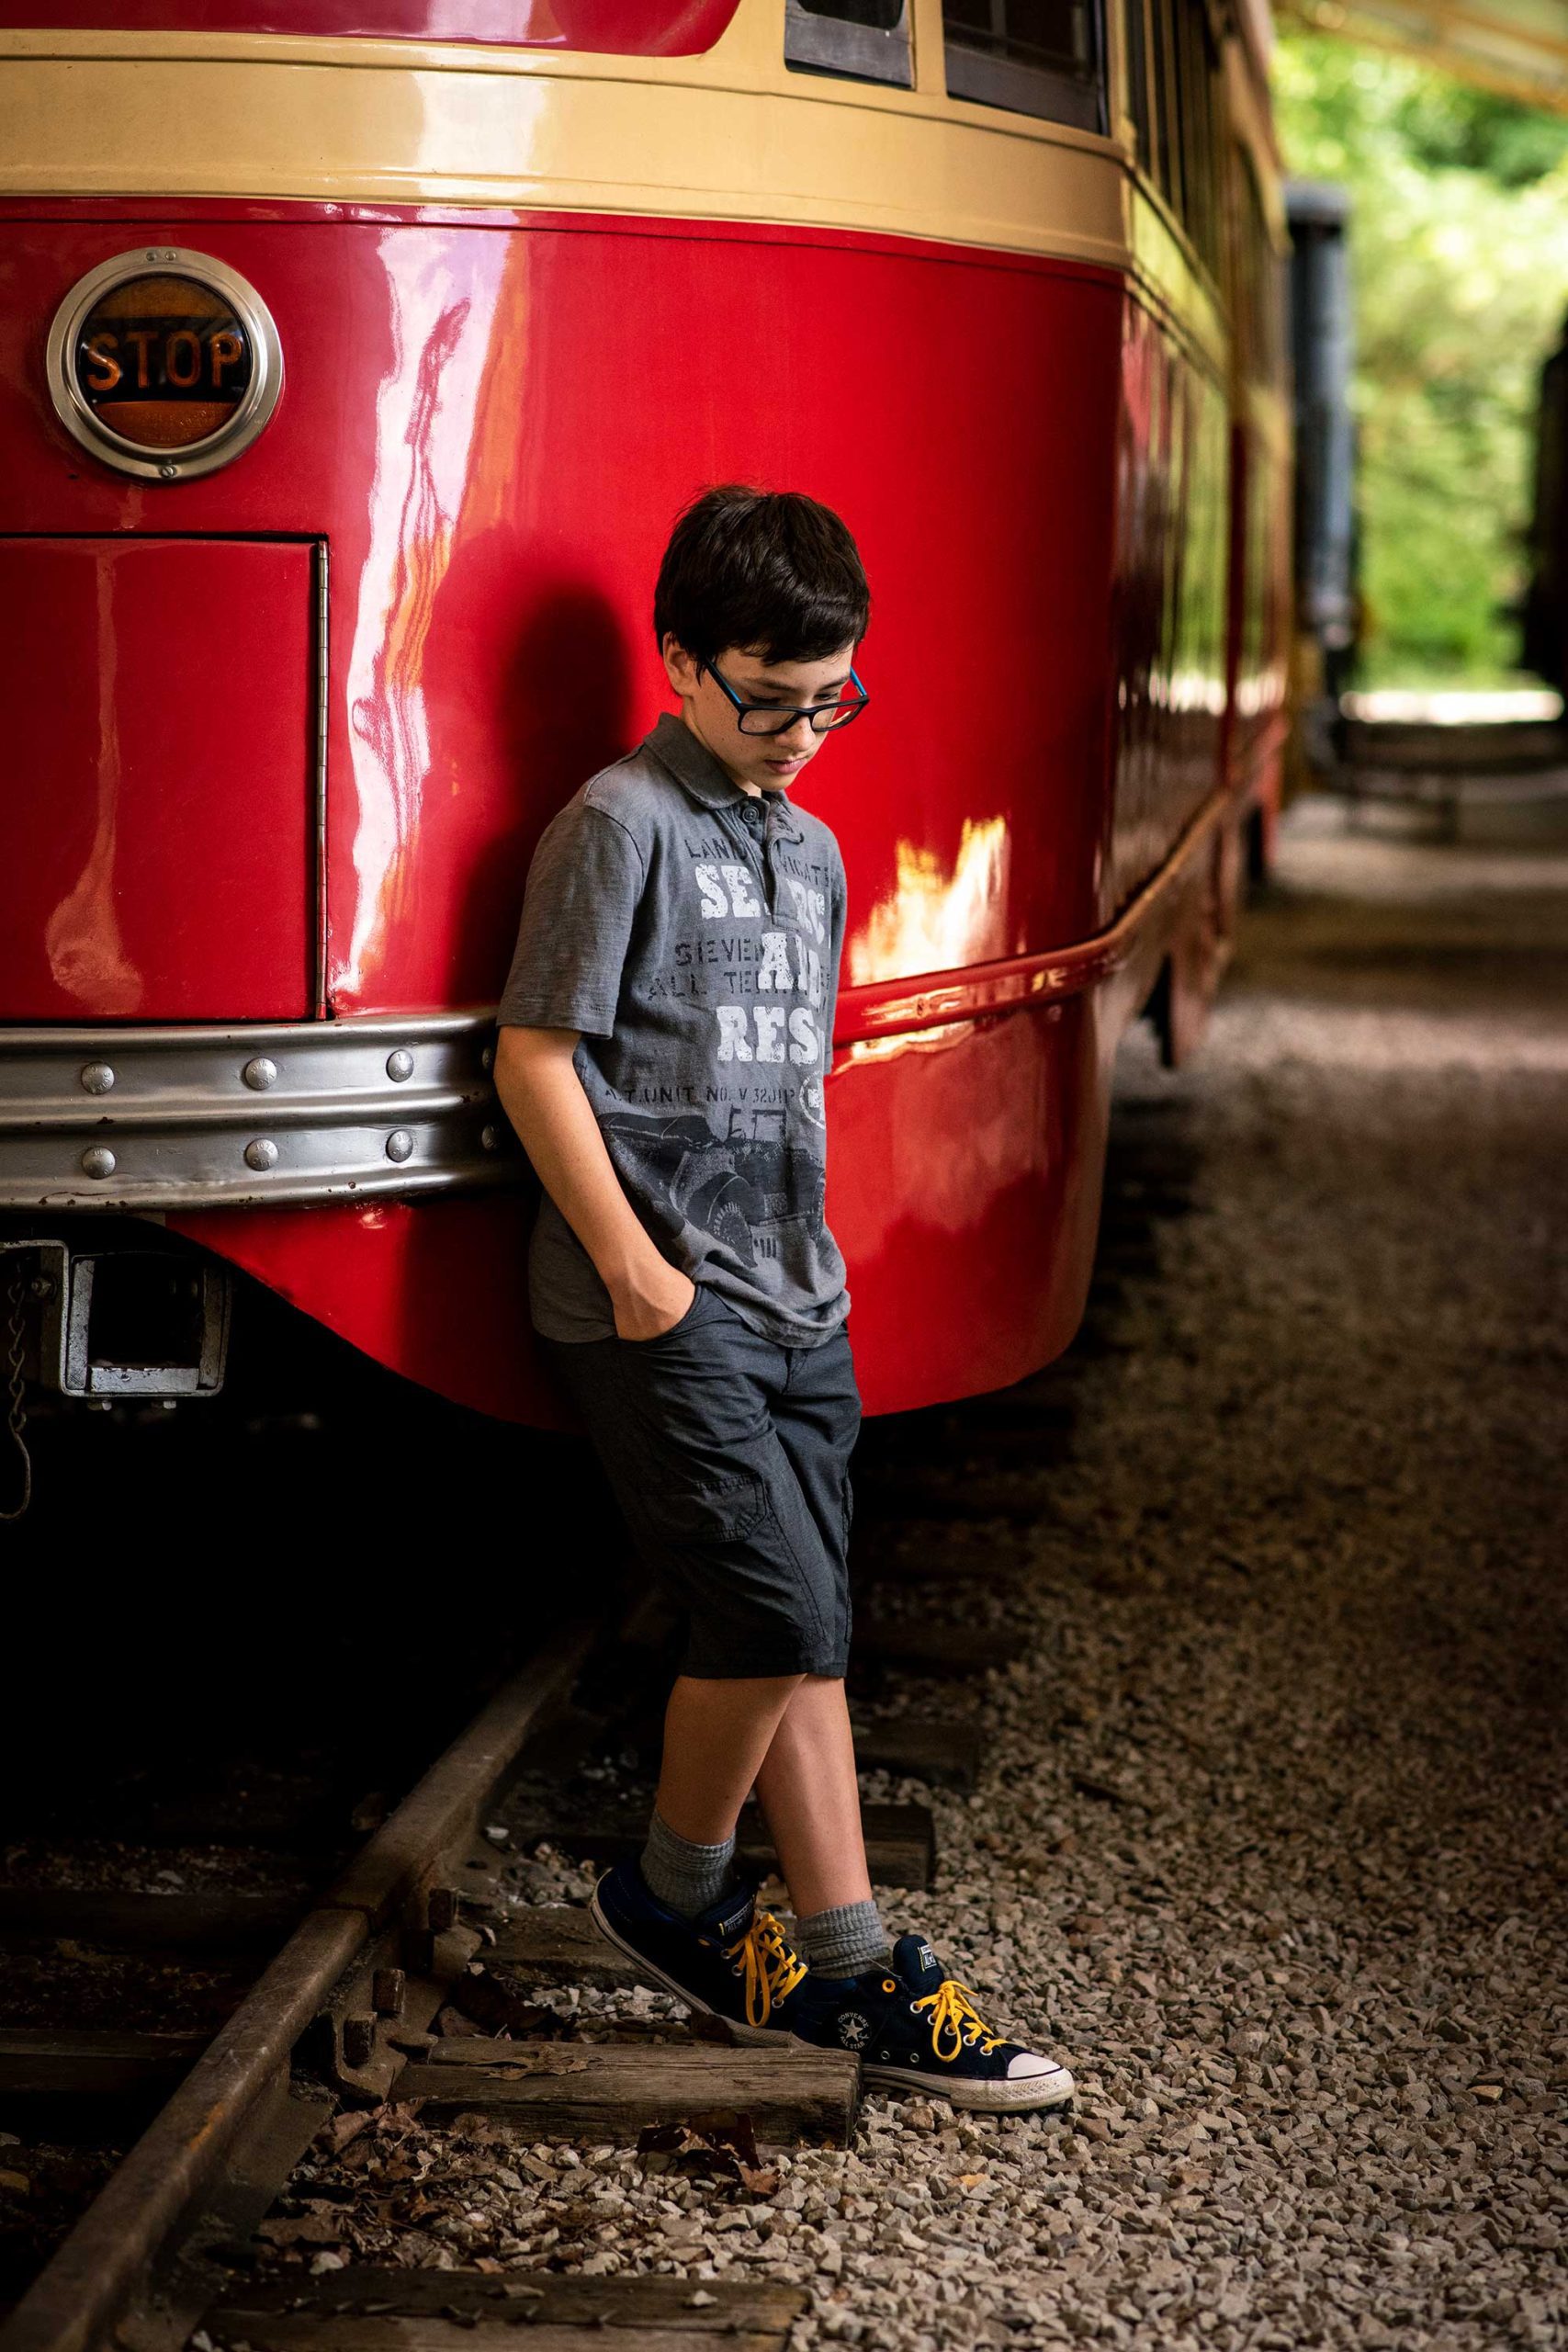 Young teen boy leaning against a red trolley car.